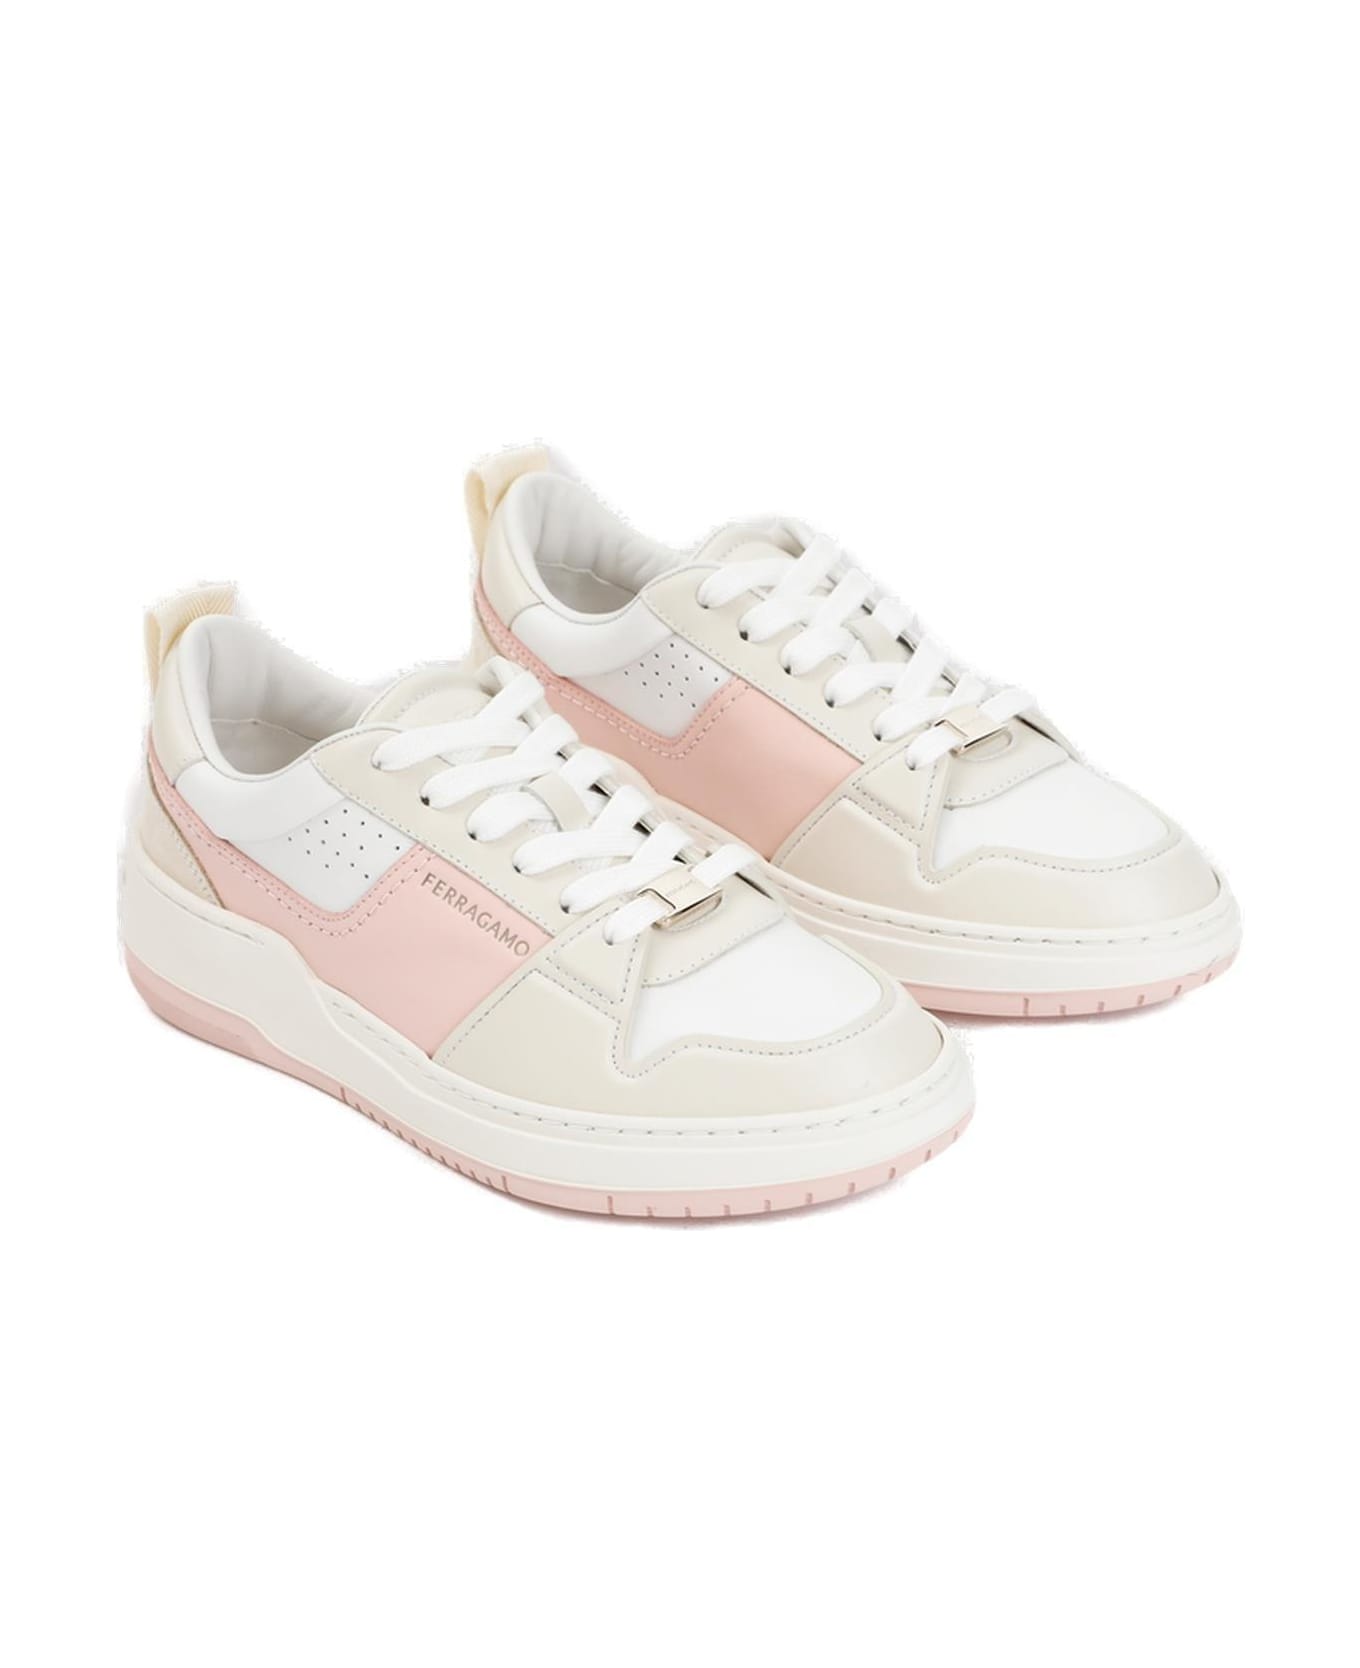 Ferragamo Logo Printed Lace-up Sneakers - PINK/WHITE